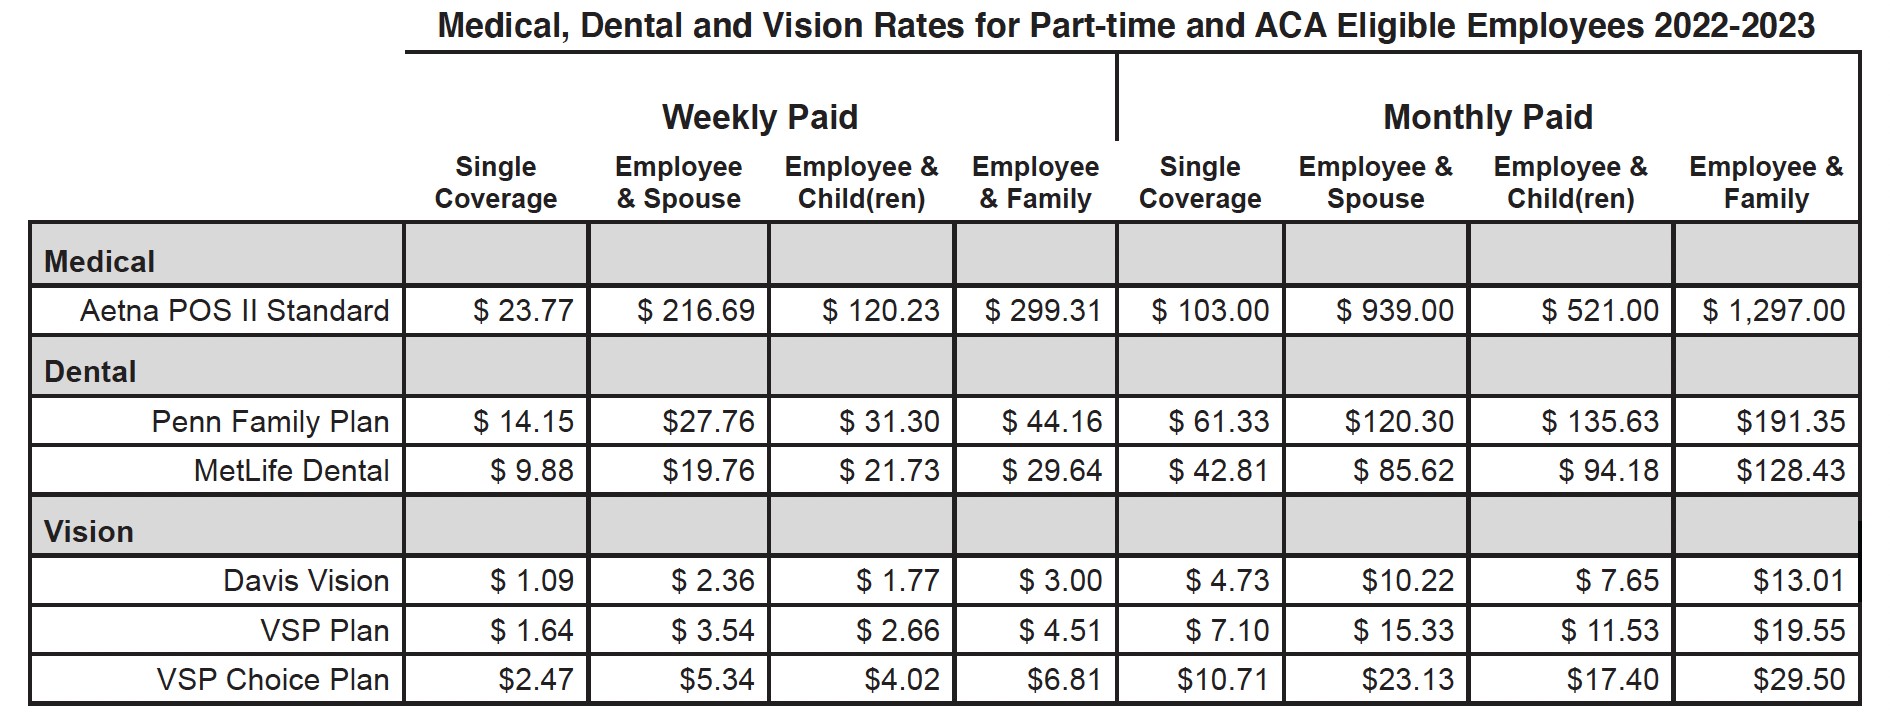 Medical, Dental and Vision Rates for Part-time and ACA Eligible Employees 2022-2023